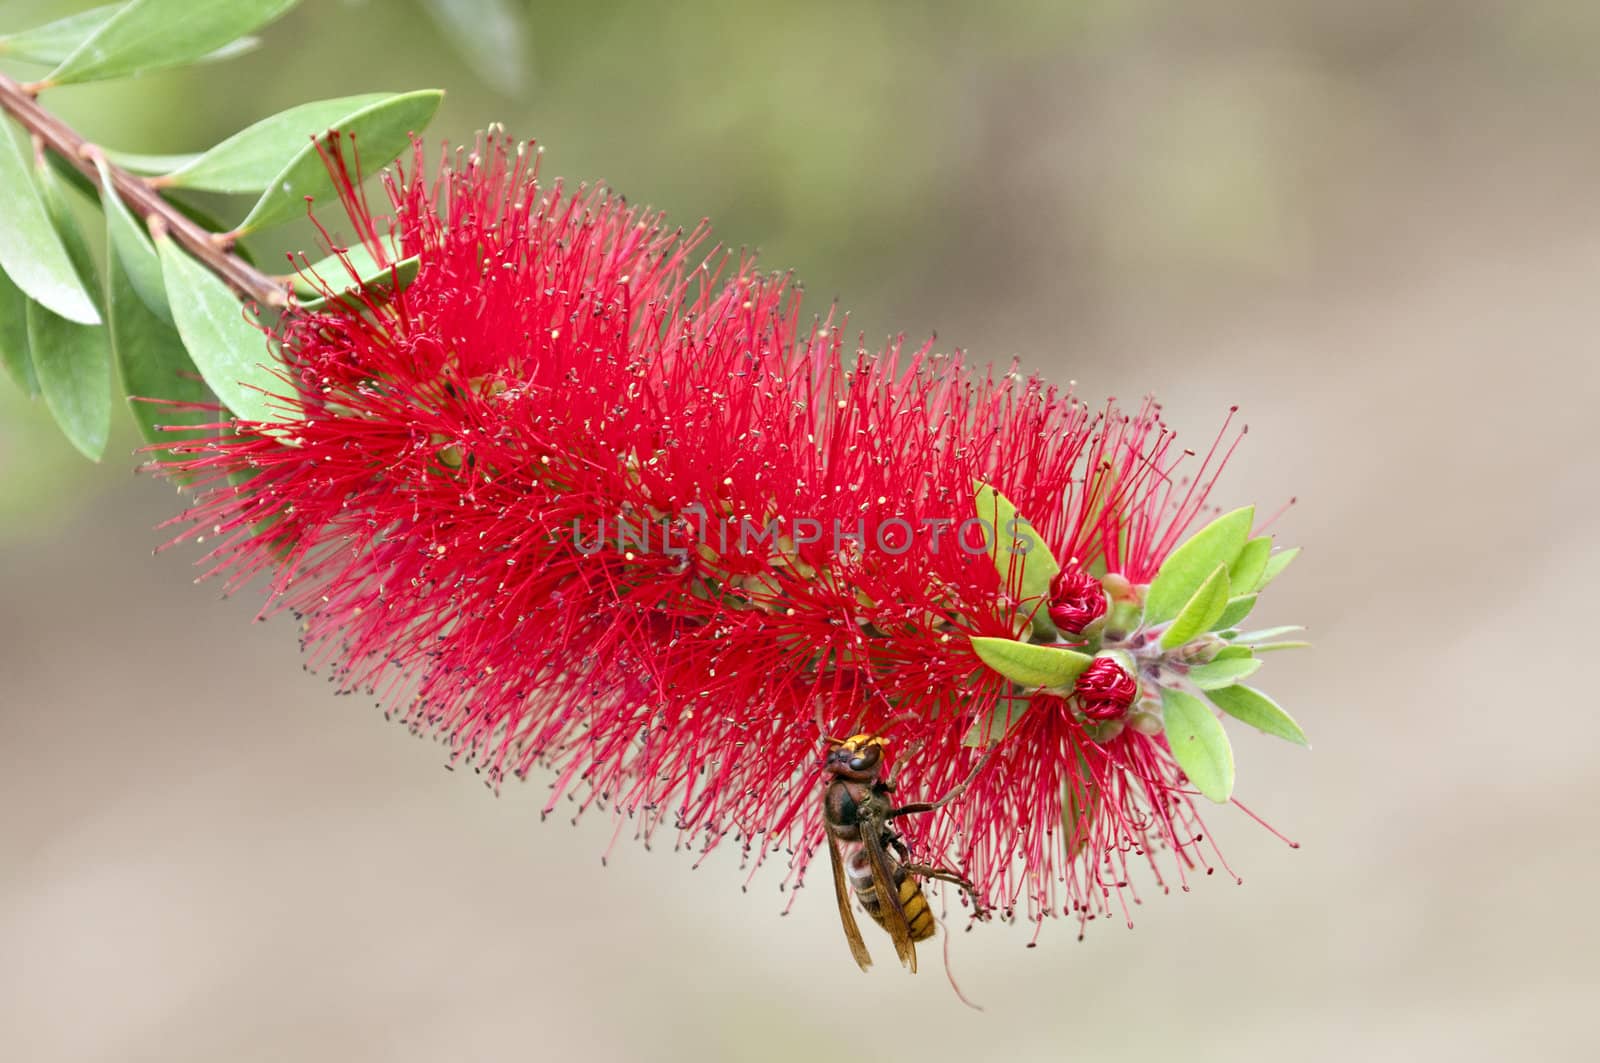 A hornet wasp on a feathery red tropical flower